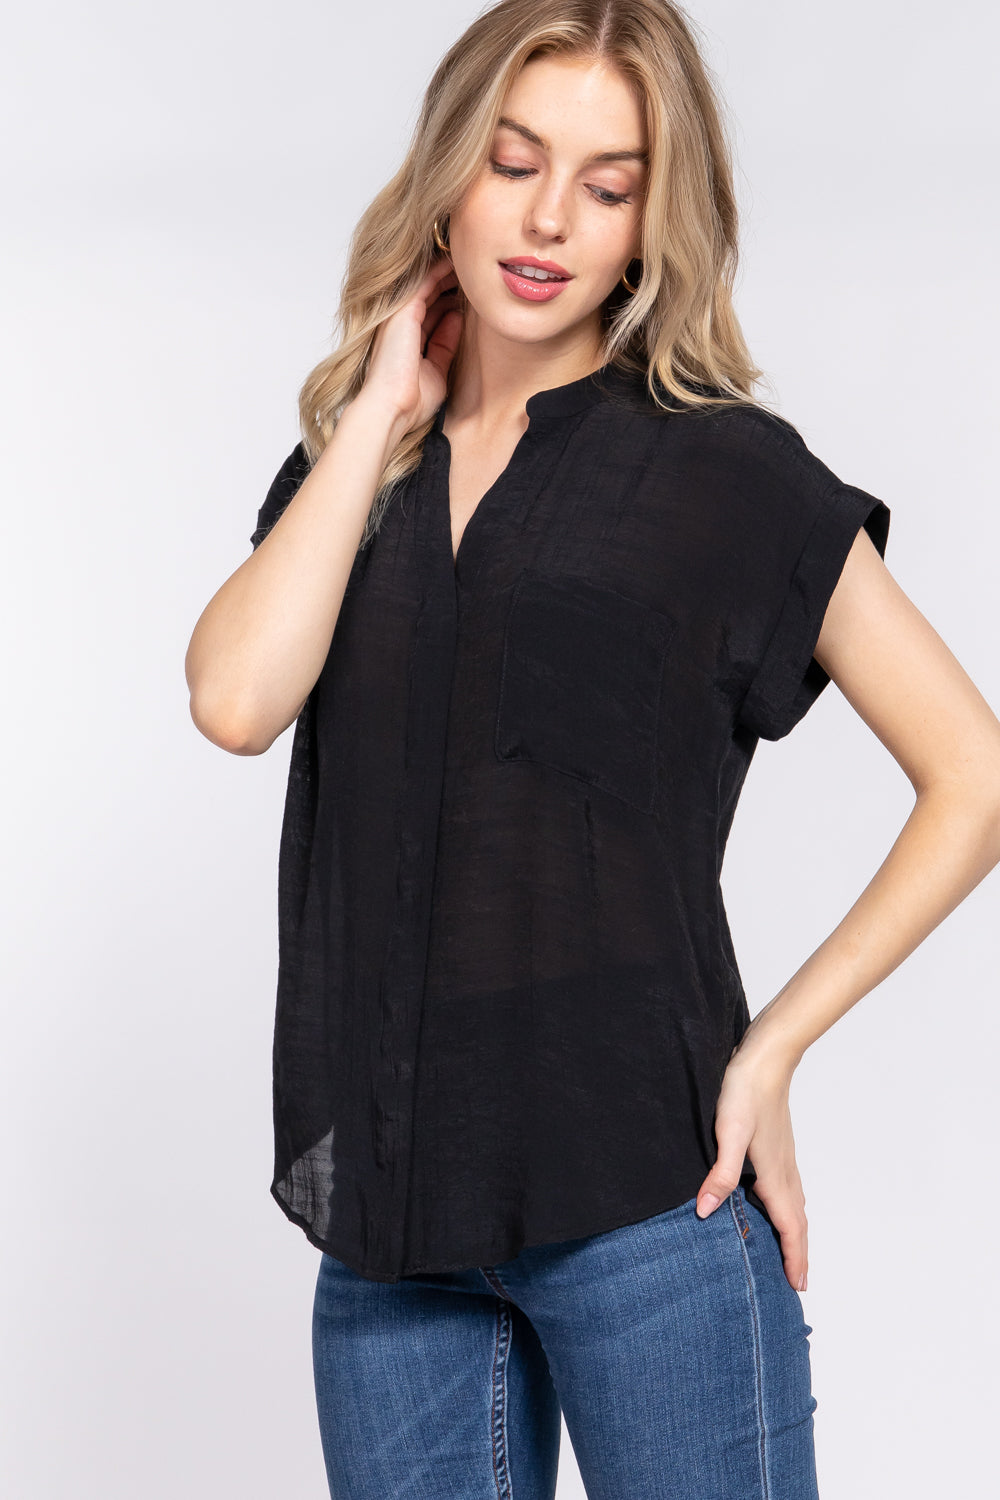 Women's black dolman sleeve woven top with open neck, front pocket, button down front and back slit.